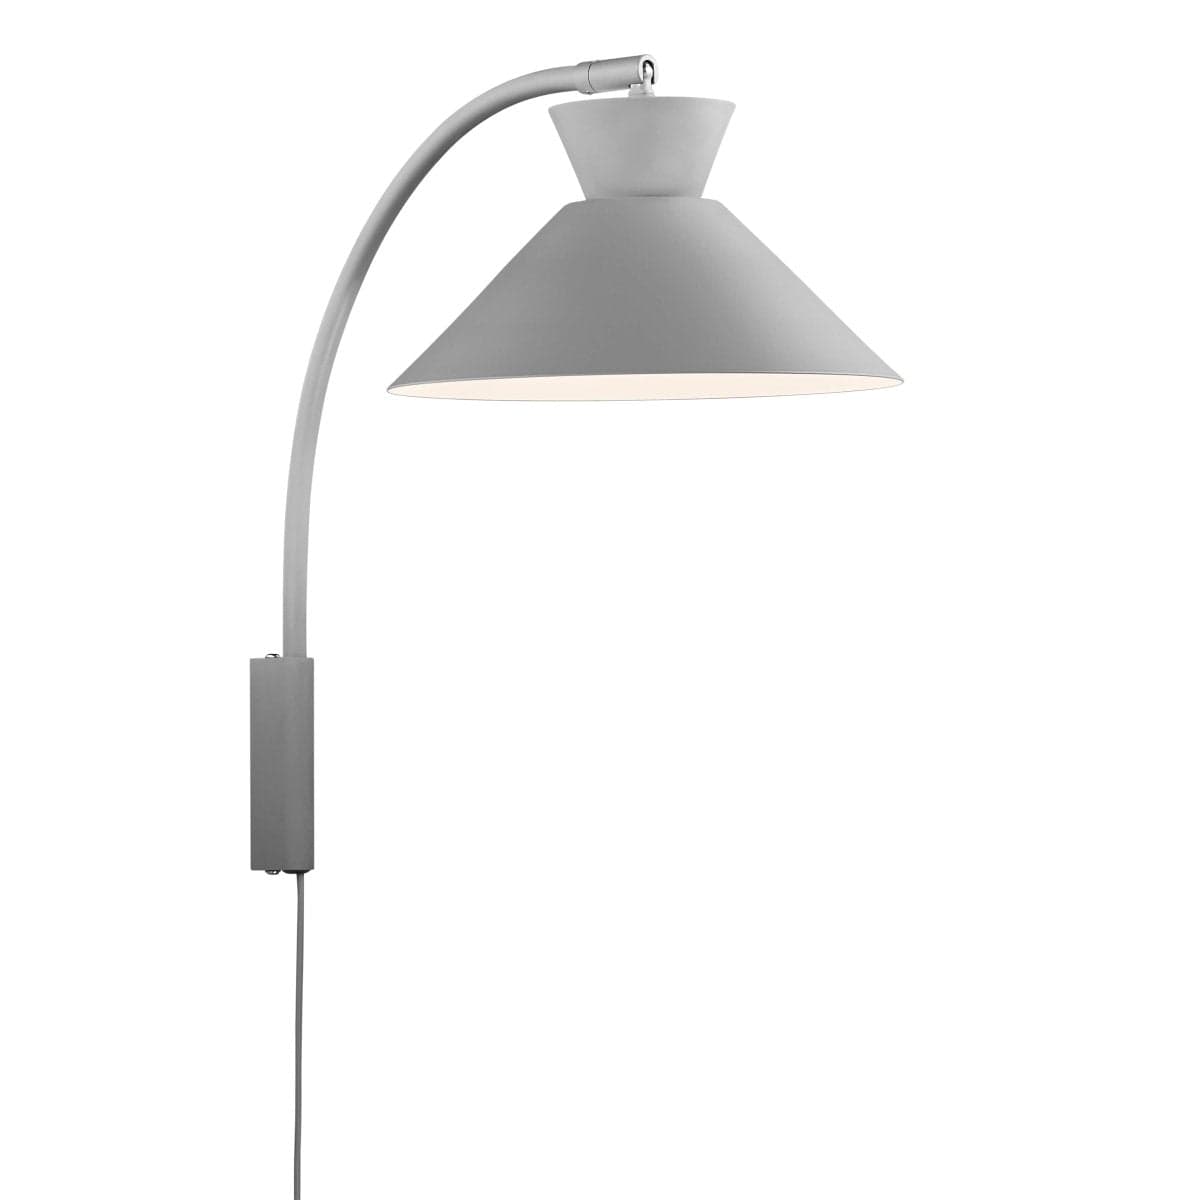 Nordlux Wall Lights Grey Dial Wall Light, grey, black or white